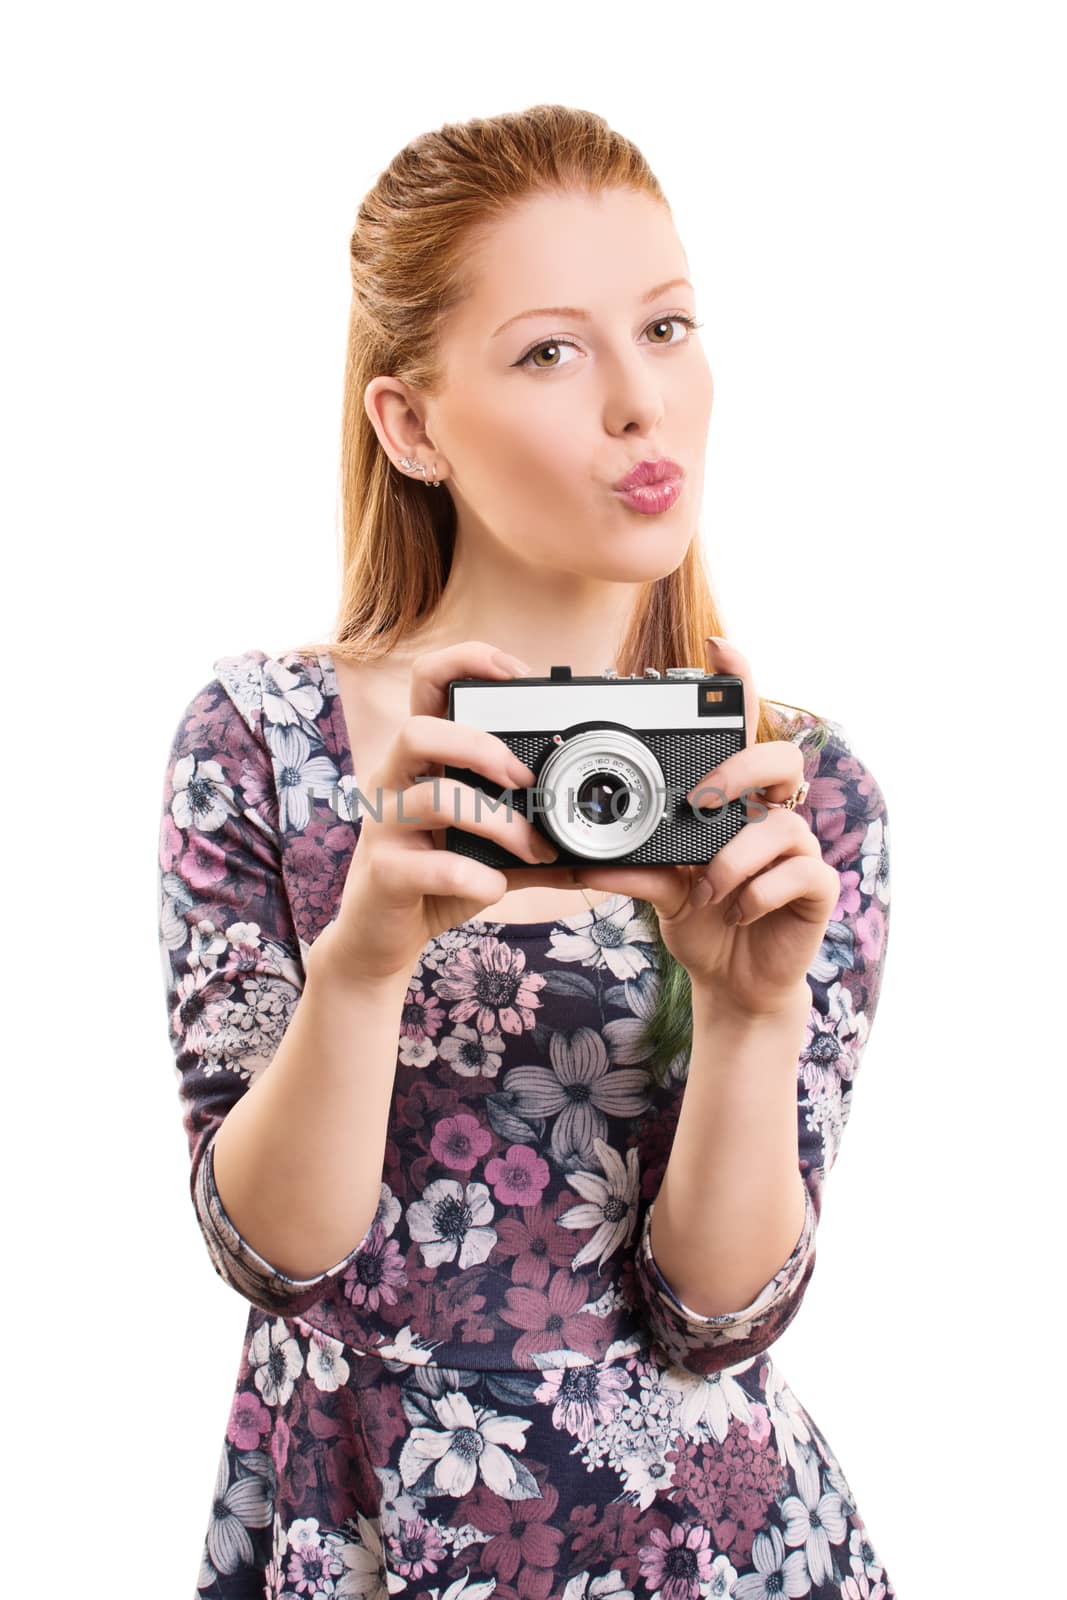 Beautiful young girl taking a picture by Mendelex